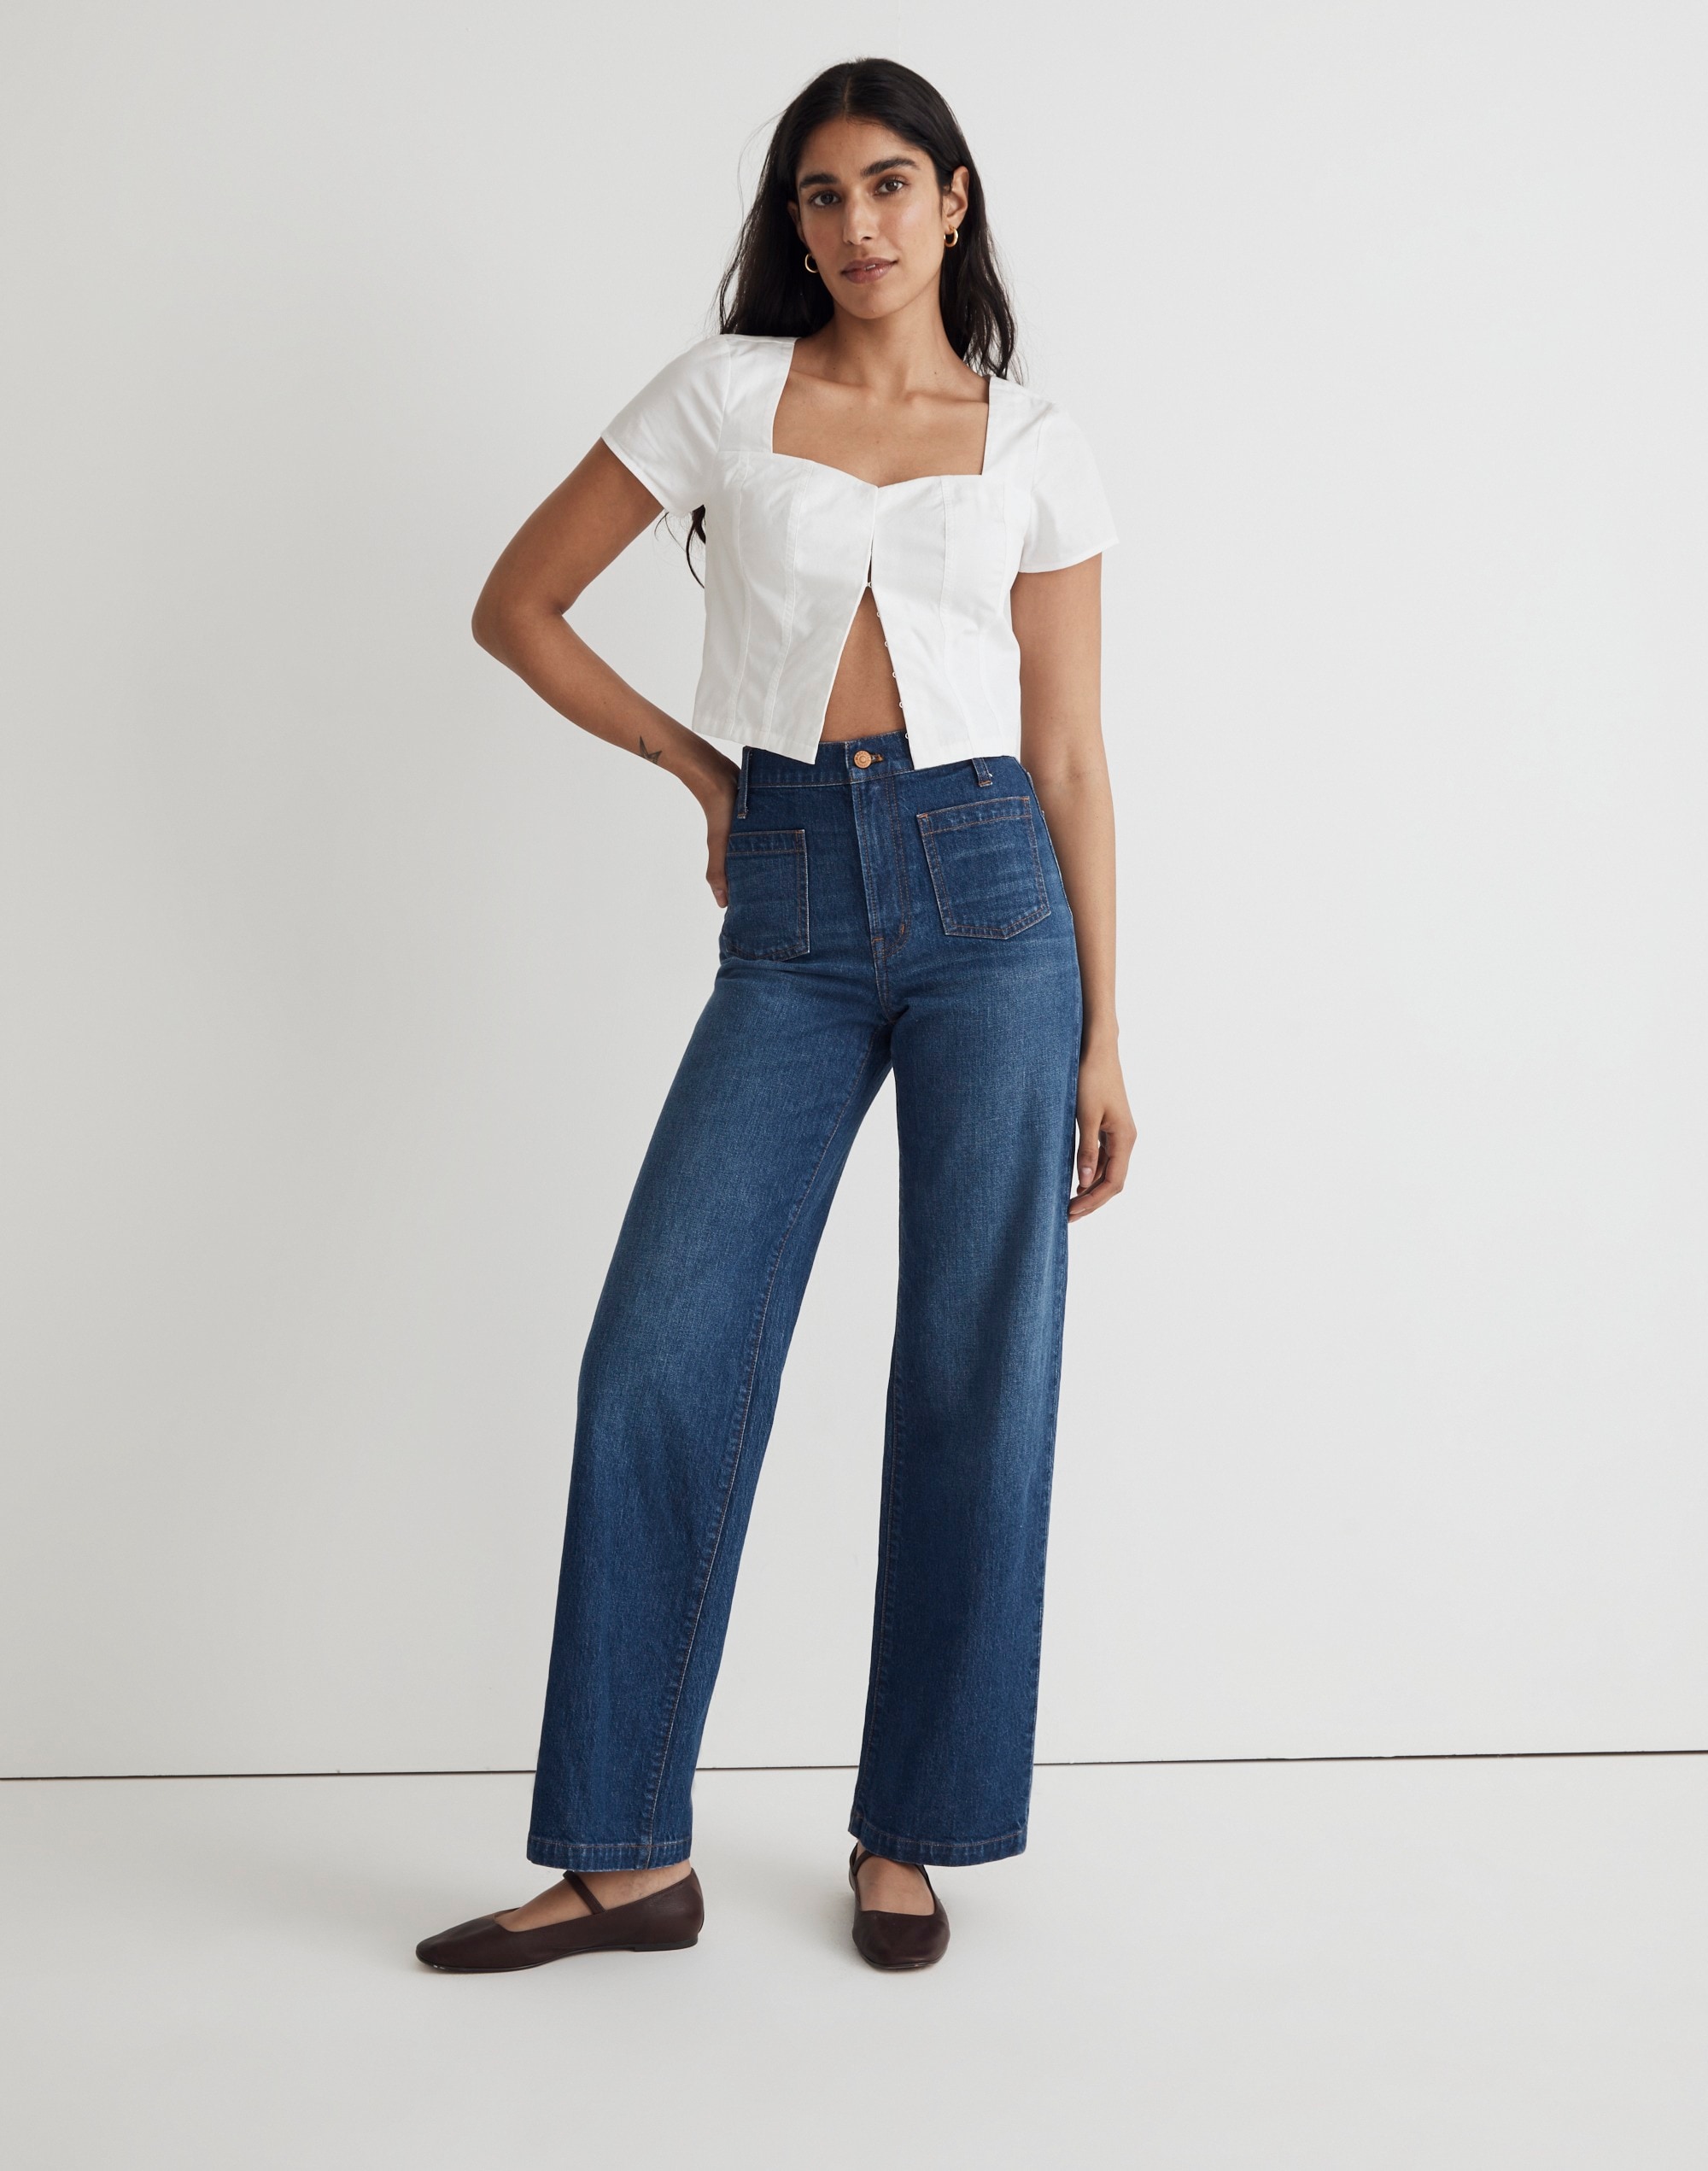 Buy AE Next Level Patched Low-Rise Curvy Jegging online